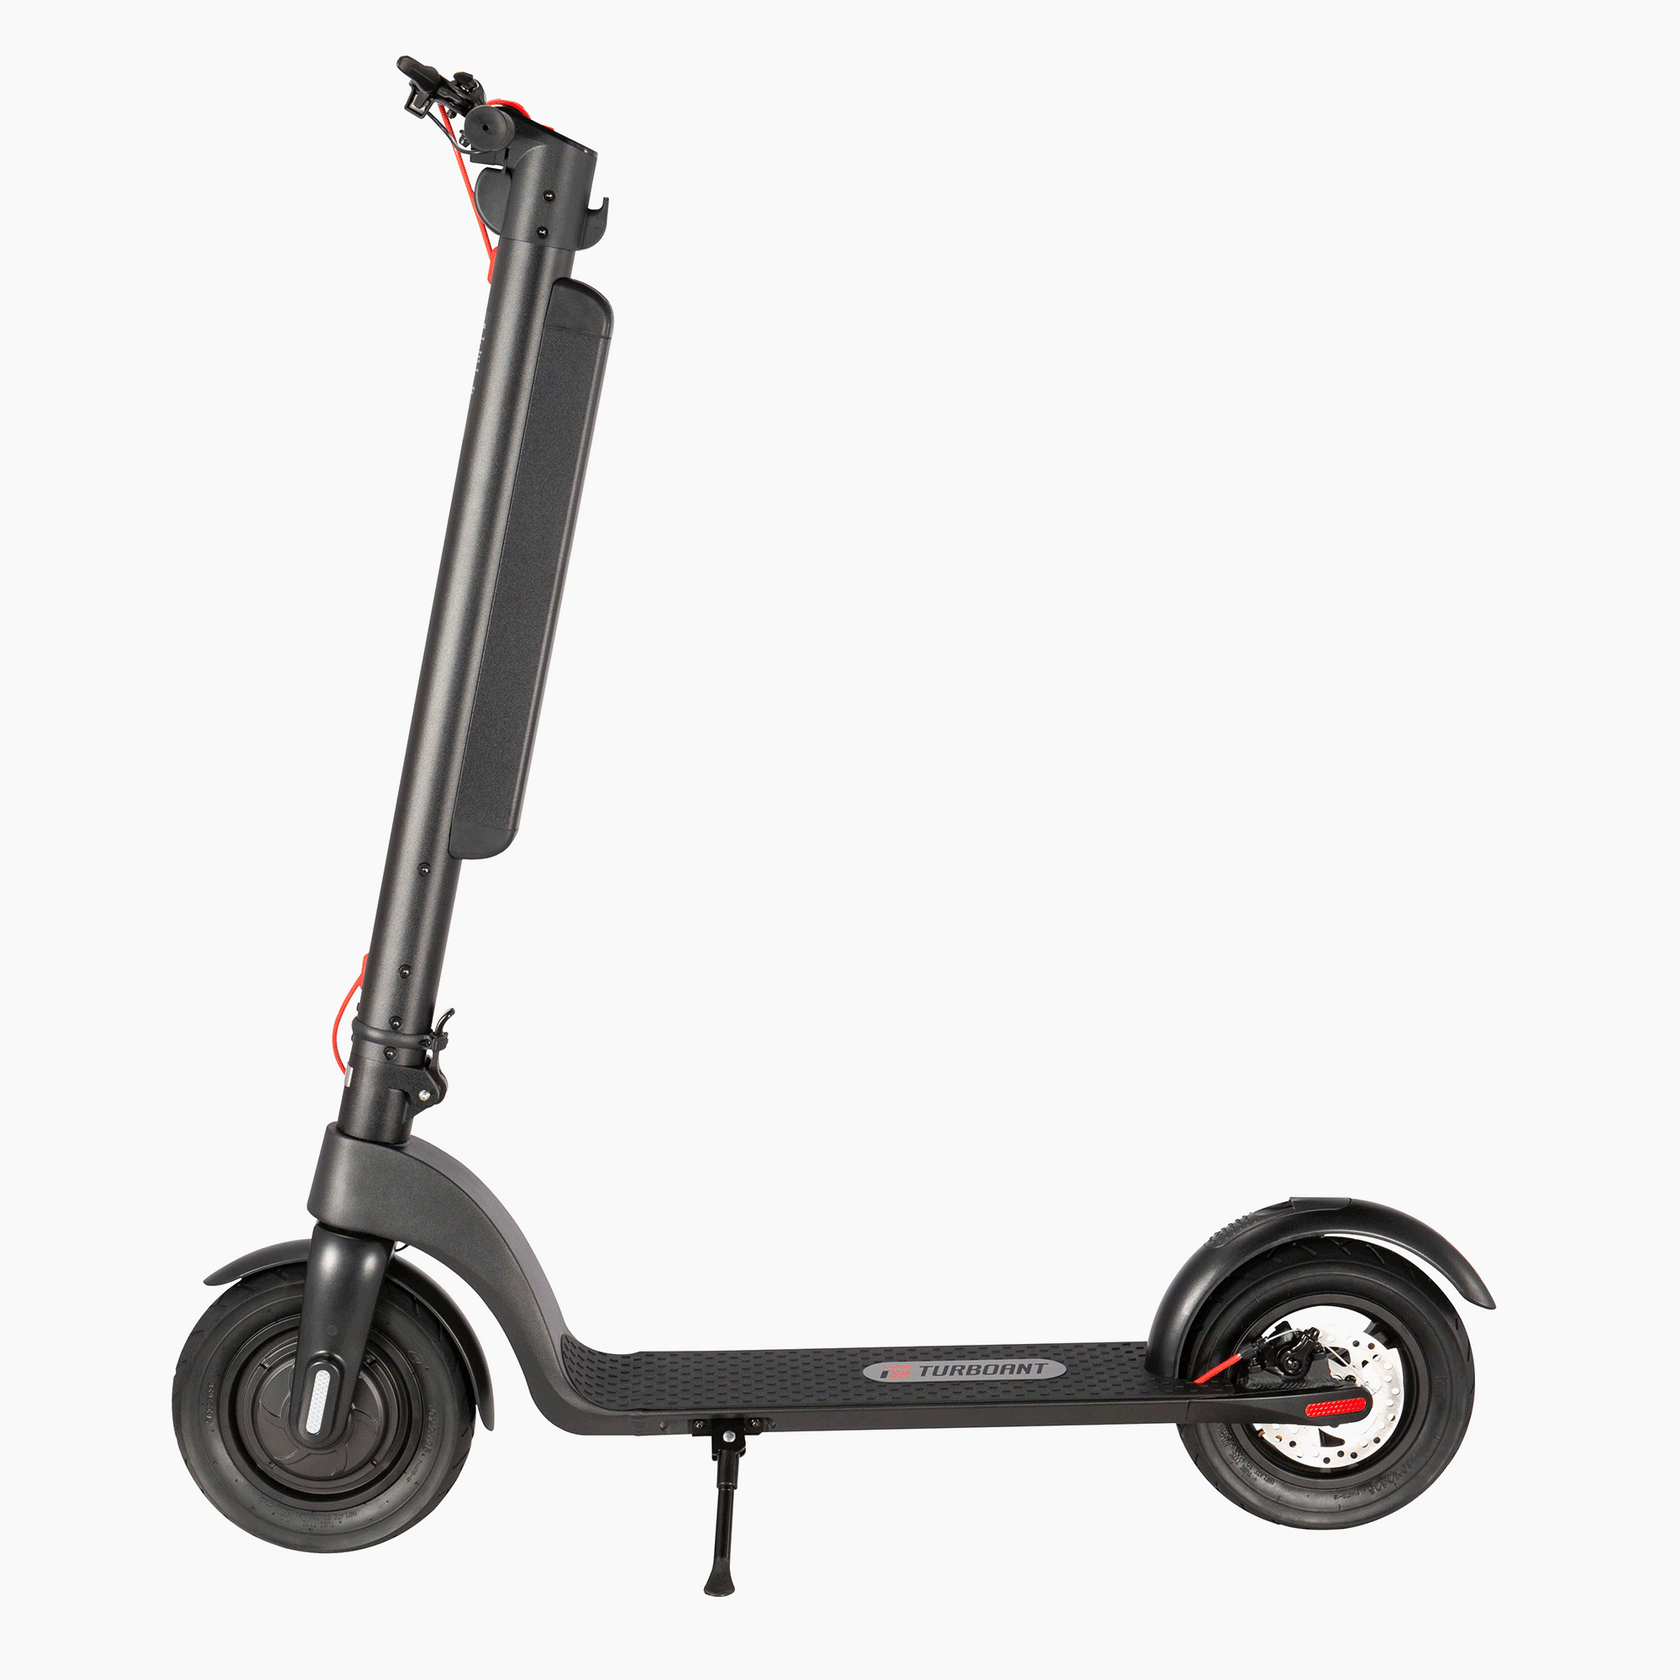 girls electric scooter